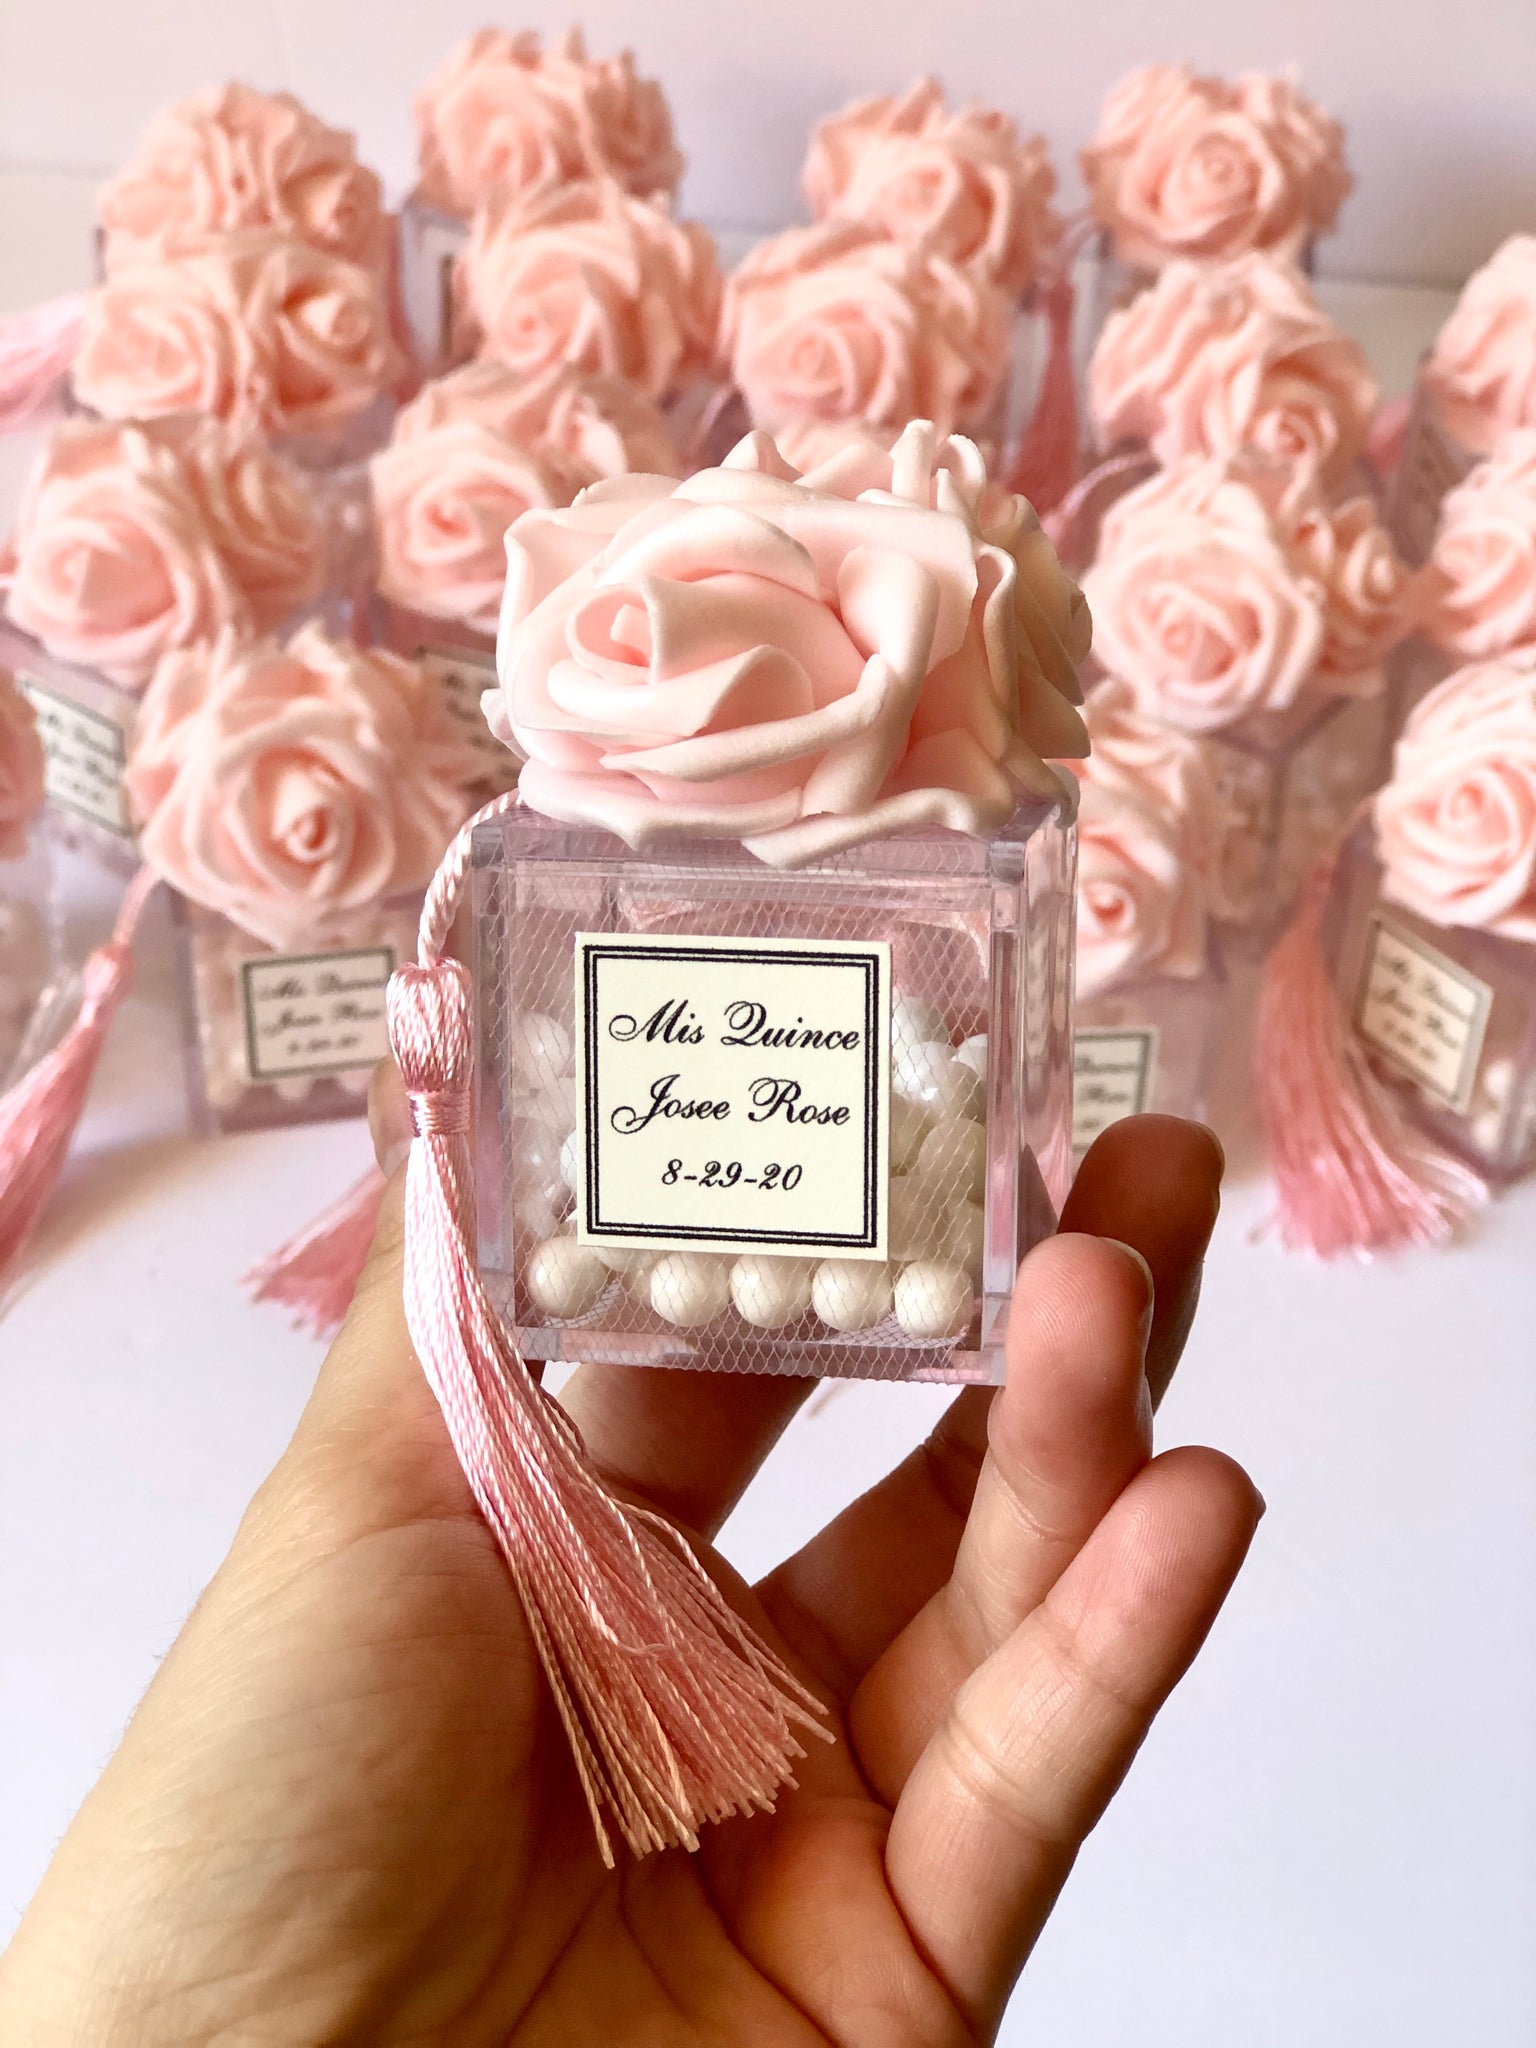 5pcs Wedding Favors, Favors, Favors Boxes, Wedding Favors for Guests, Pastel Wedding, Party Favors, Blush Wedding, Custom Favors, Pink Favor